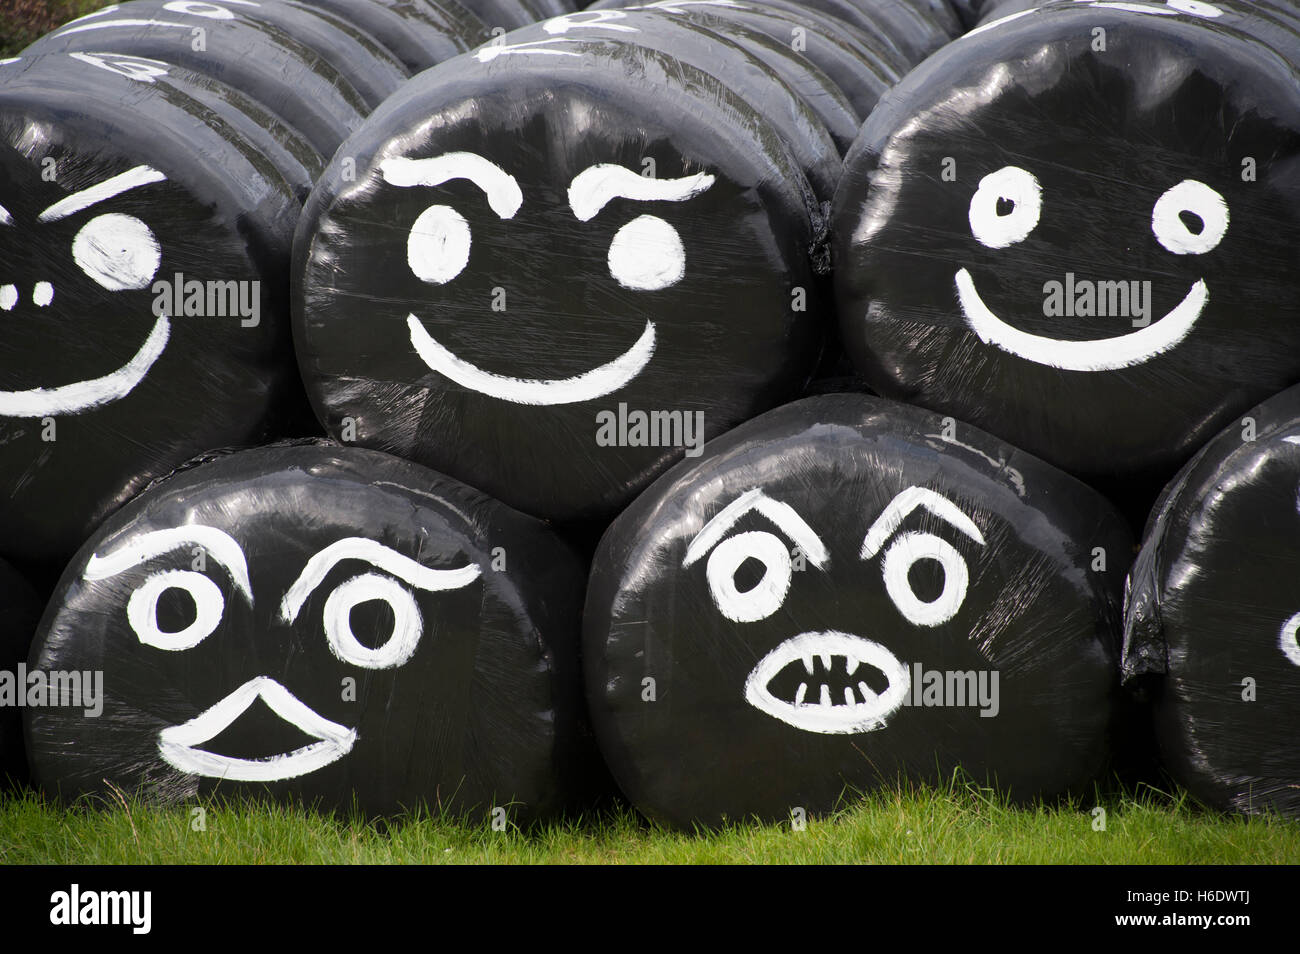 Round bales of silage wrapped in plastic film, with faces drawn on. Cumbria, UK. Stock Photo